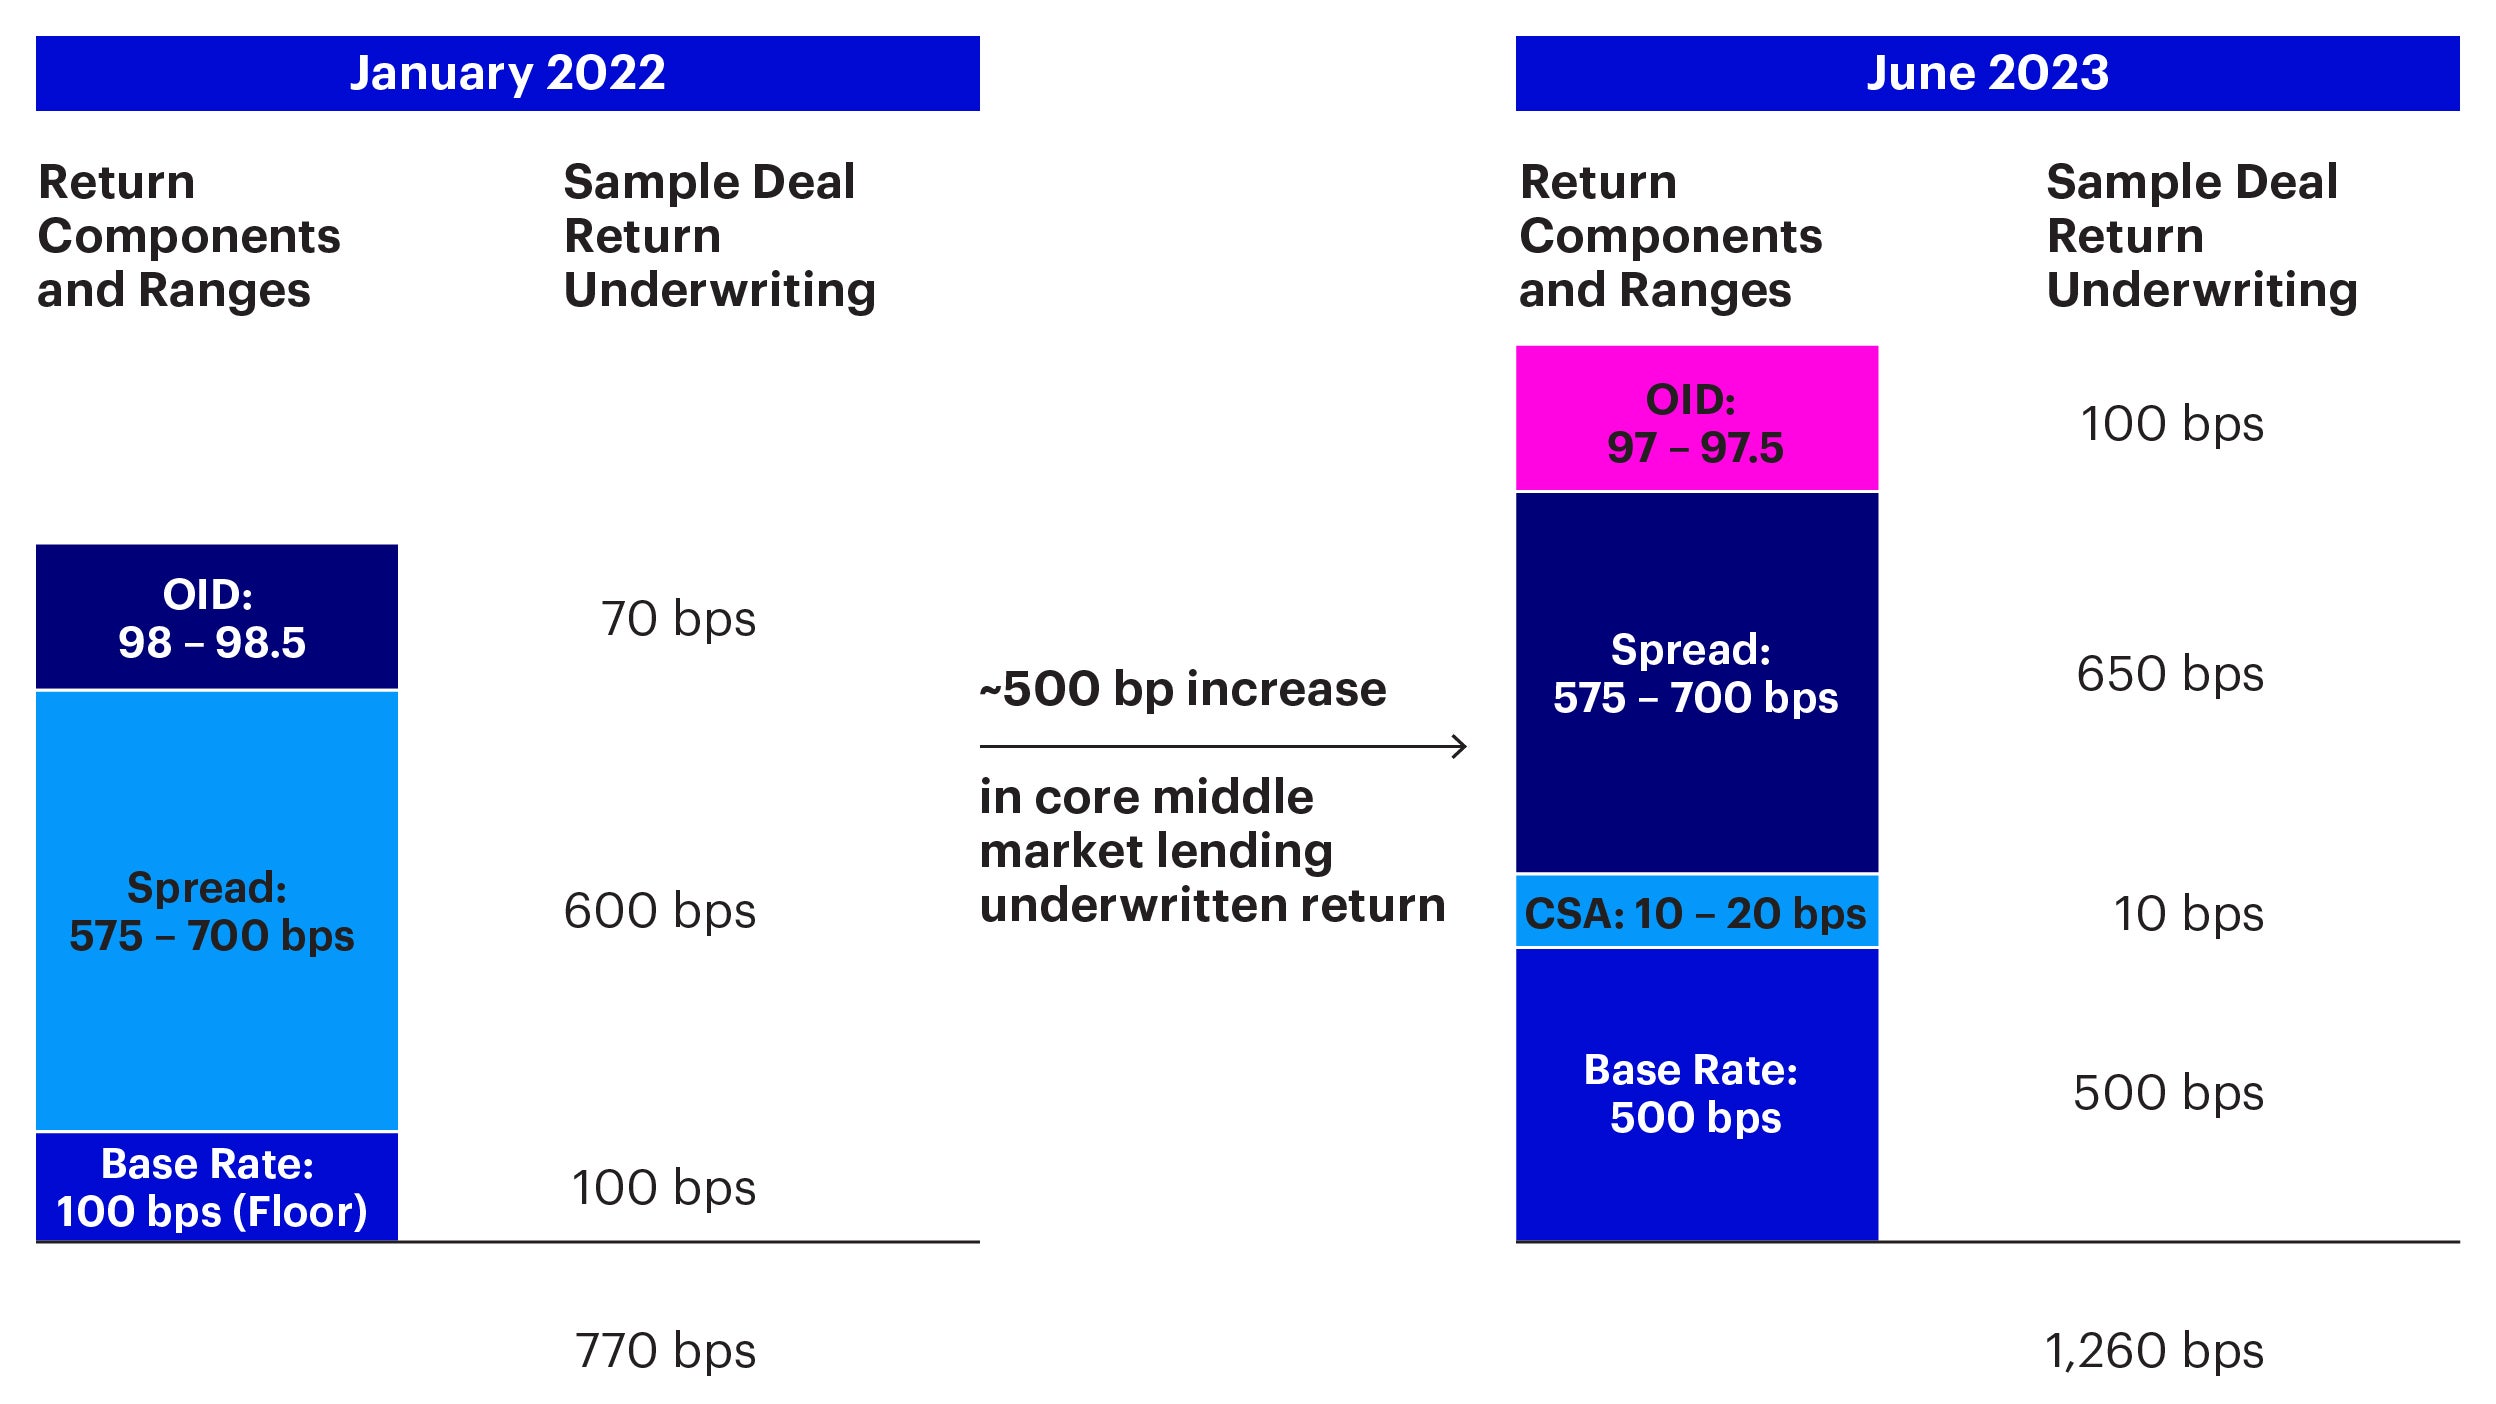 a.	Two graphs showing the return components and ranges between January 2022 and August 2023, with OID, Spread and Base Rate making up the graph.